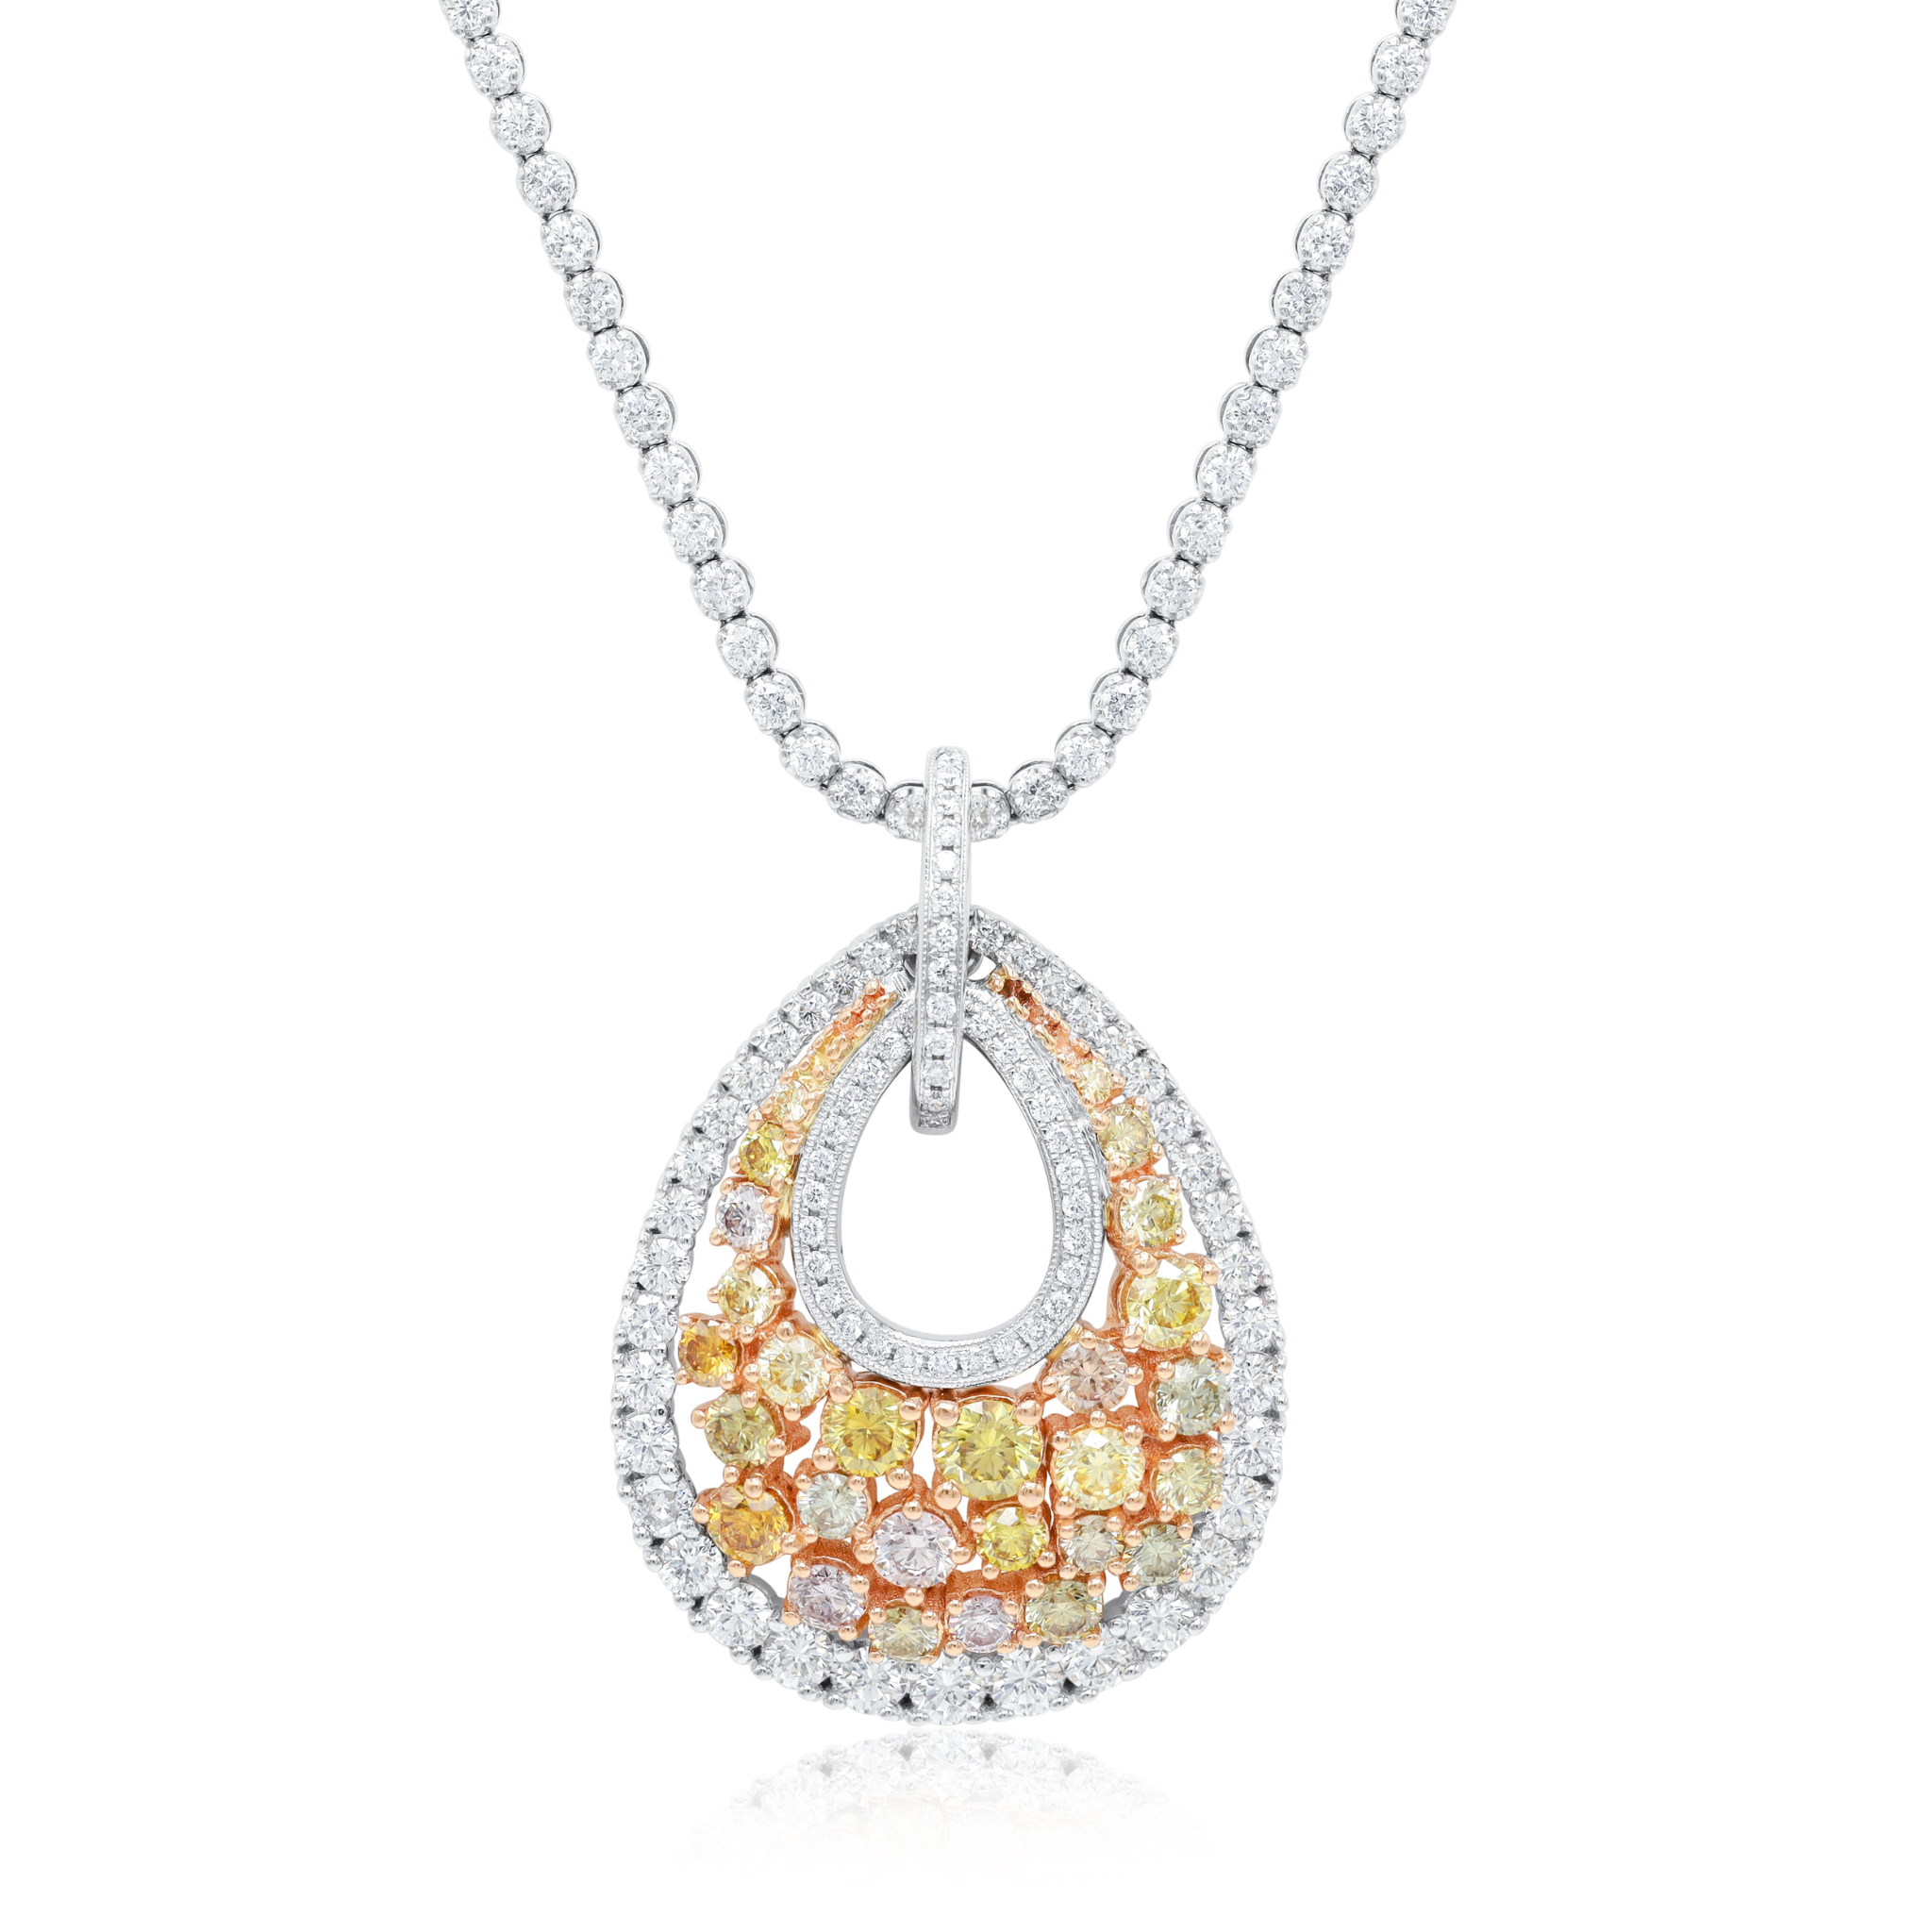 5.50ct Fancy Pink and Yellow Diamond Necklace.jpg